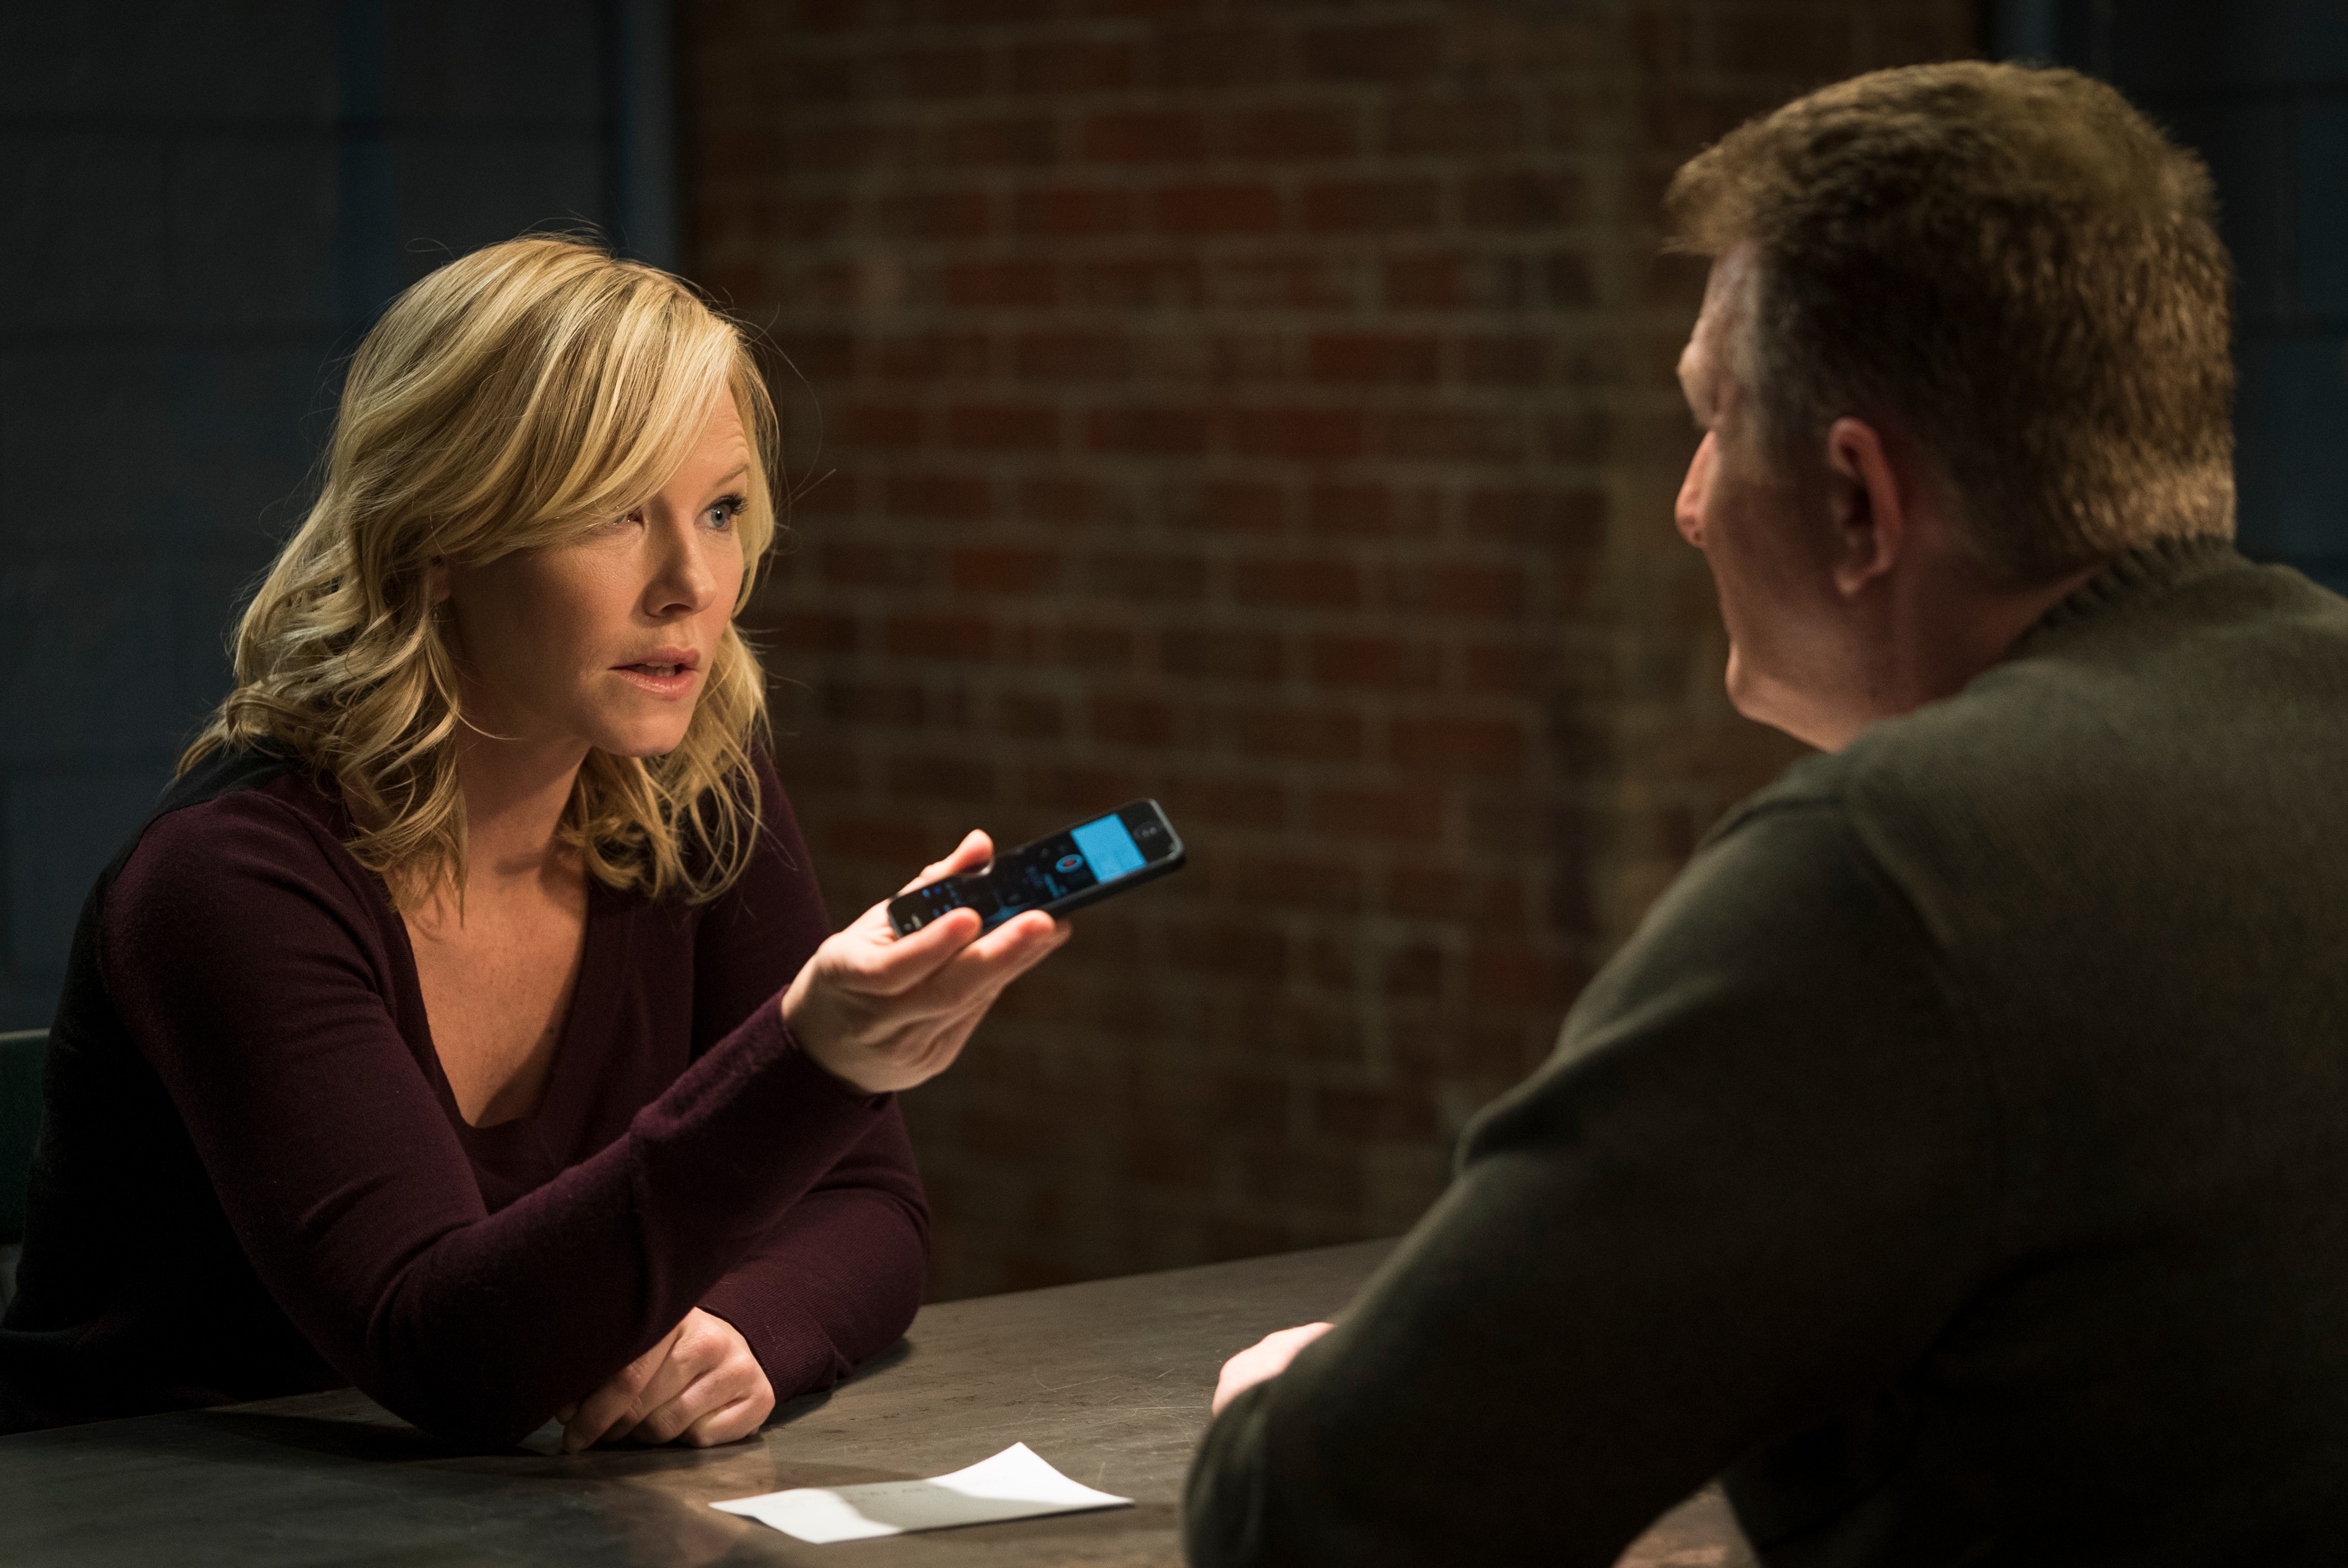 Law & Order: Special Victims Unit: Photos from "Sheltered Outcasts" Photo: 26...